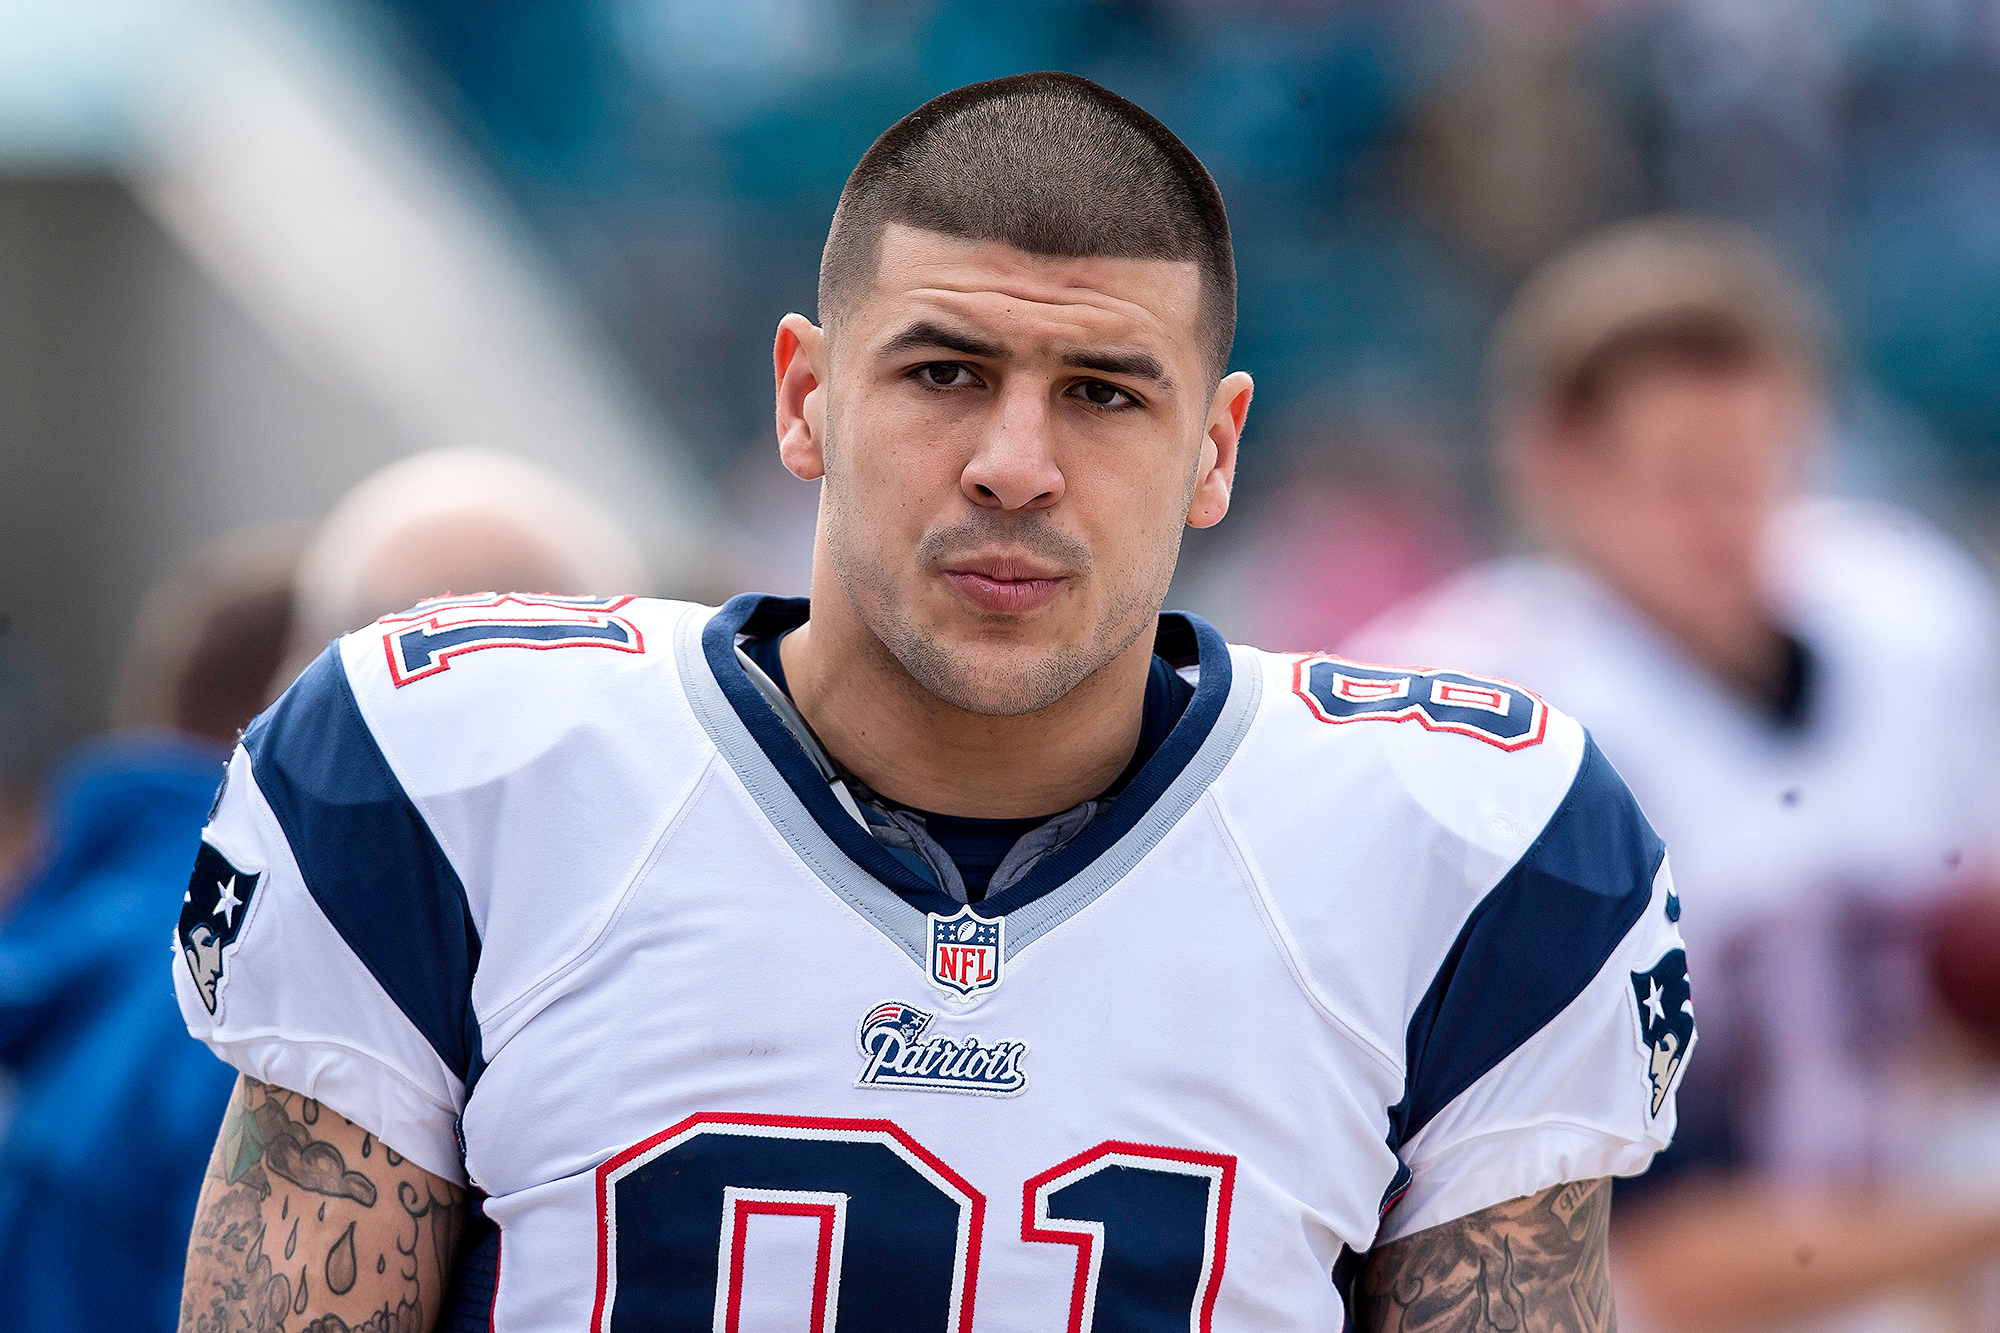 Aaron Hernandez Found Dead in Prison at Age 27